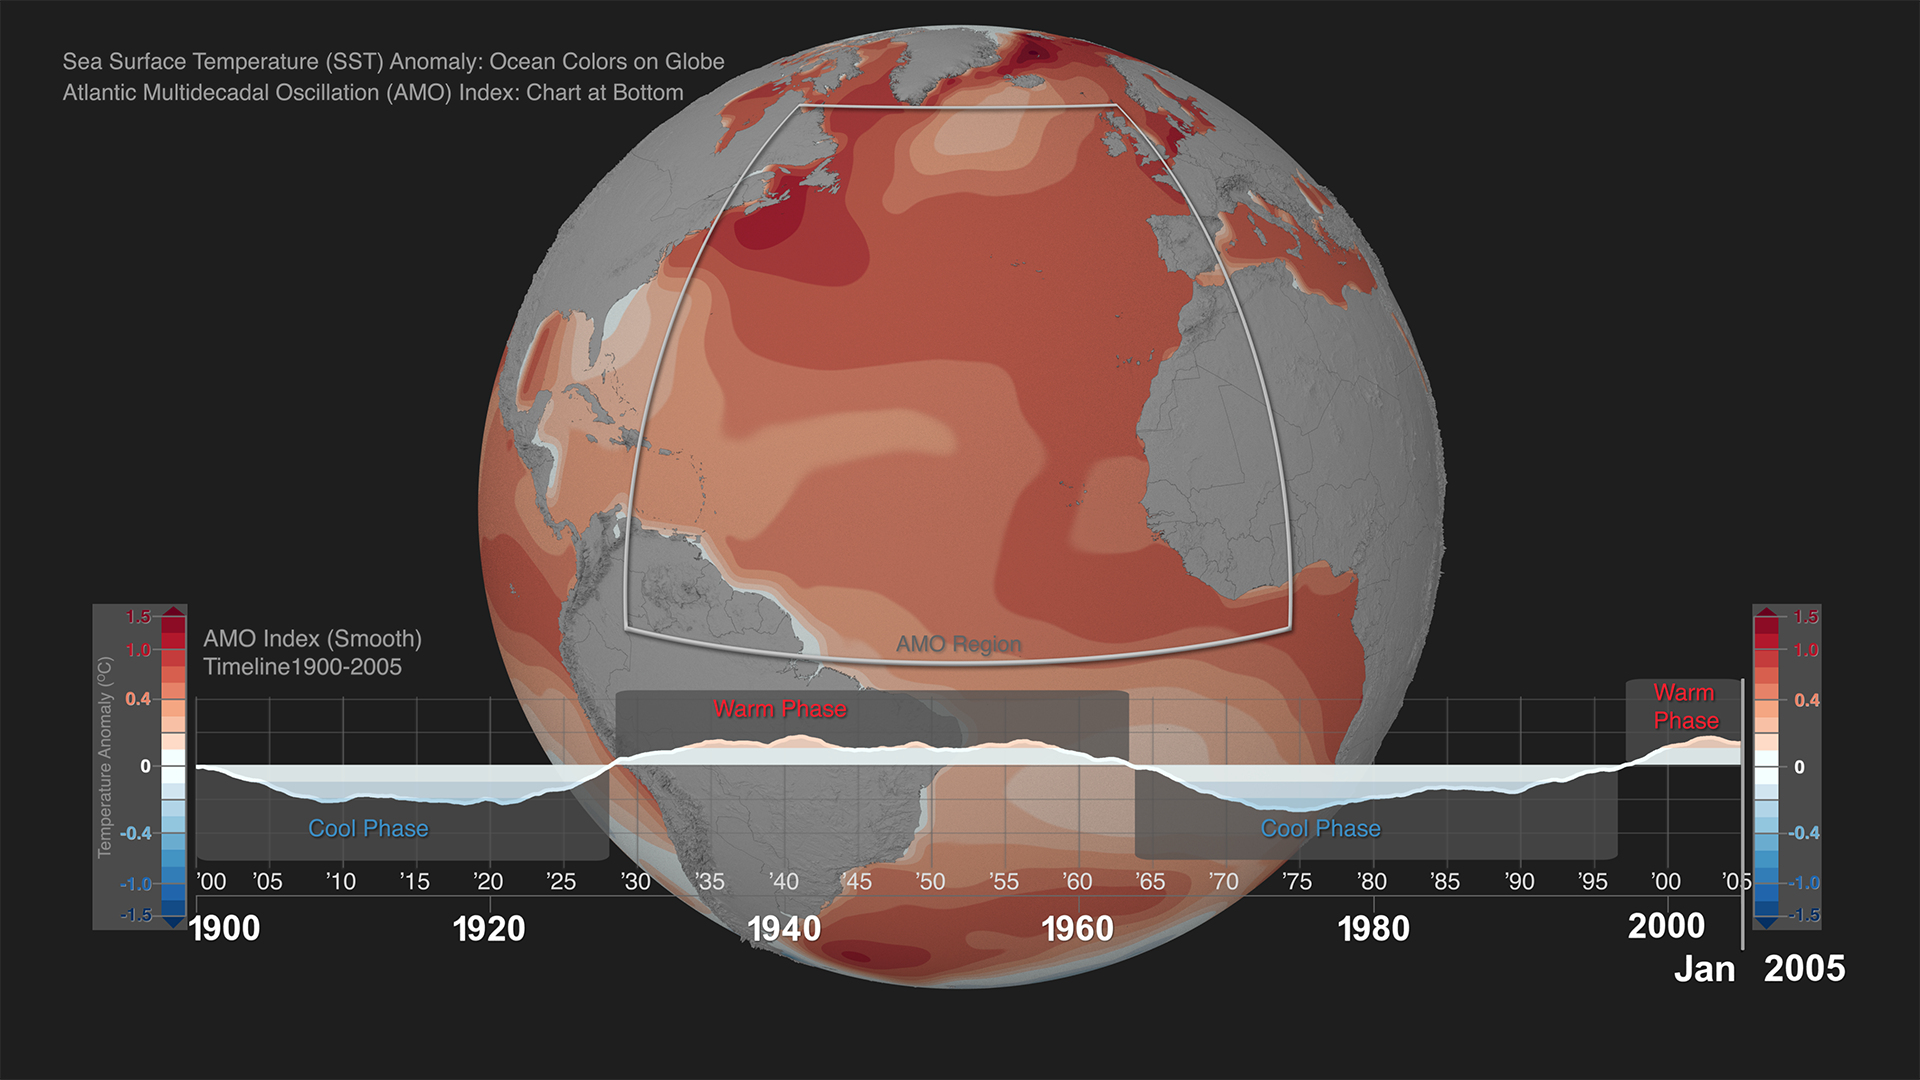 Visualization of Sea Surface Temperature (SST) Anomaly with corresponding timeplot tracking the Atlantic Multidecadal Oscillation (AMO) Index over the North Atlantic (0-80N) for the period of 1900-2005. 